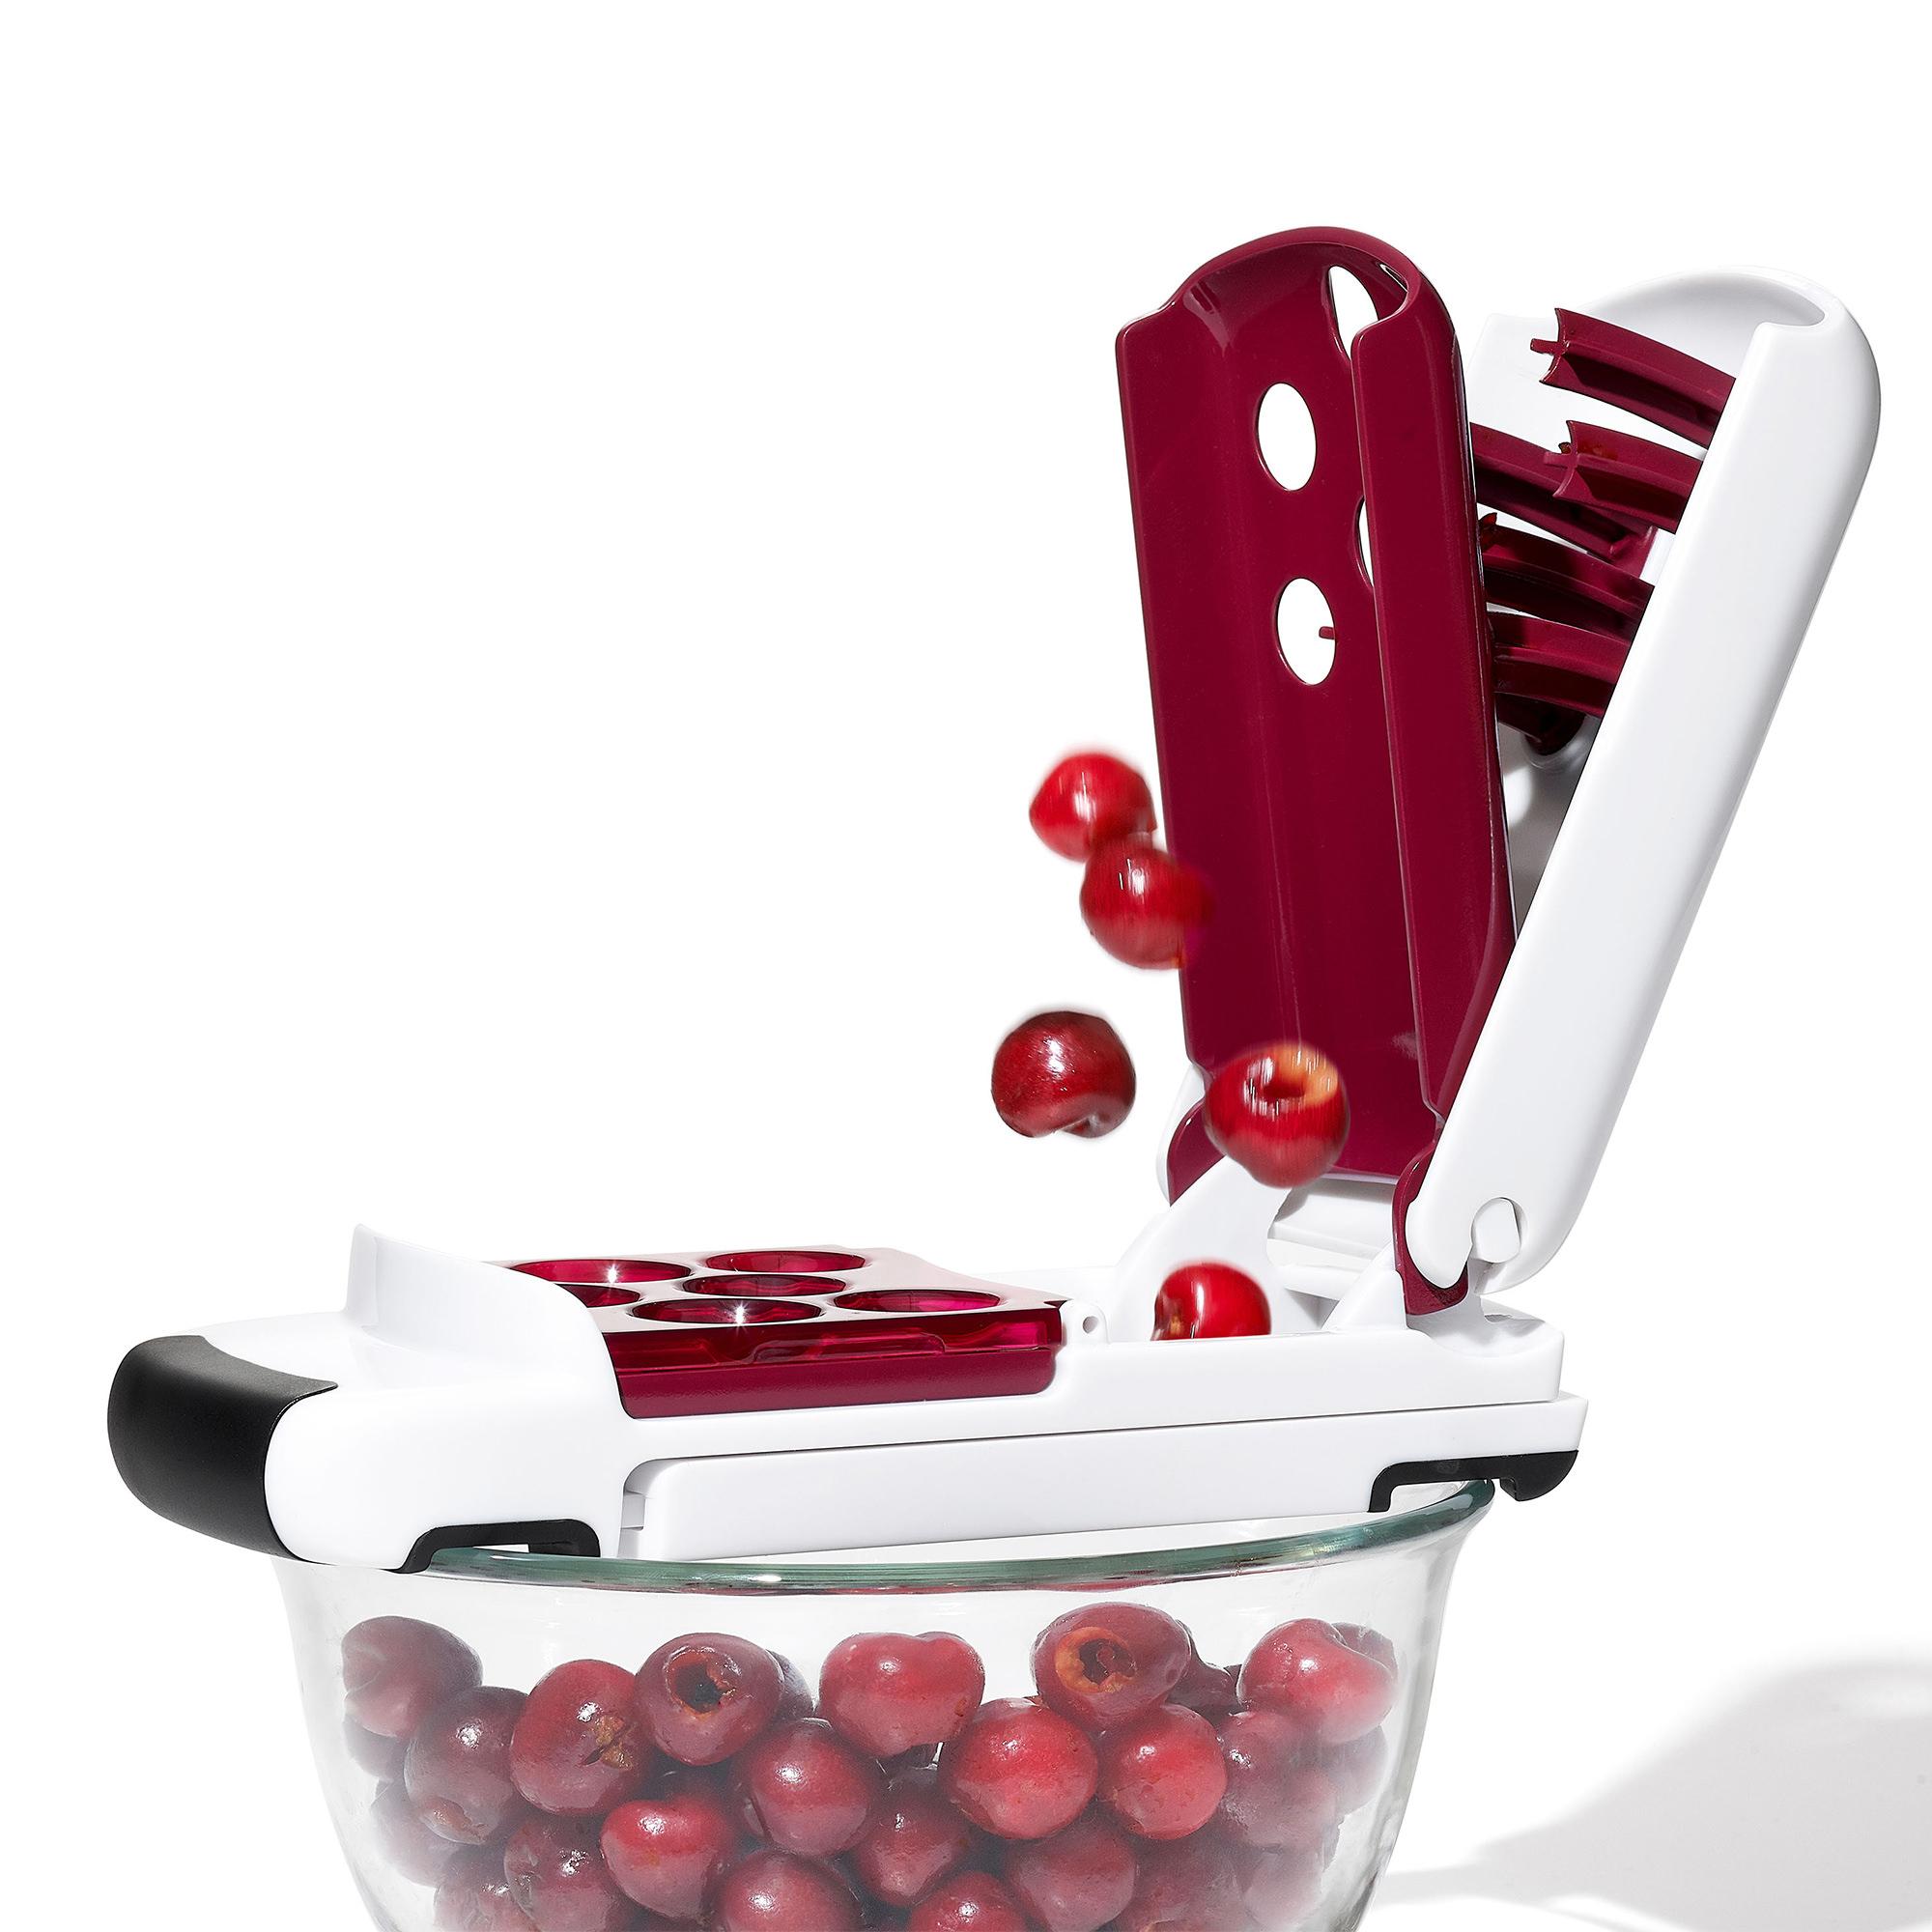 OXO Good Grips Quick Release Multi Cherry Pitter Image 6